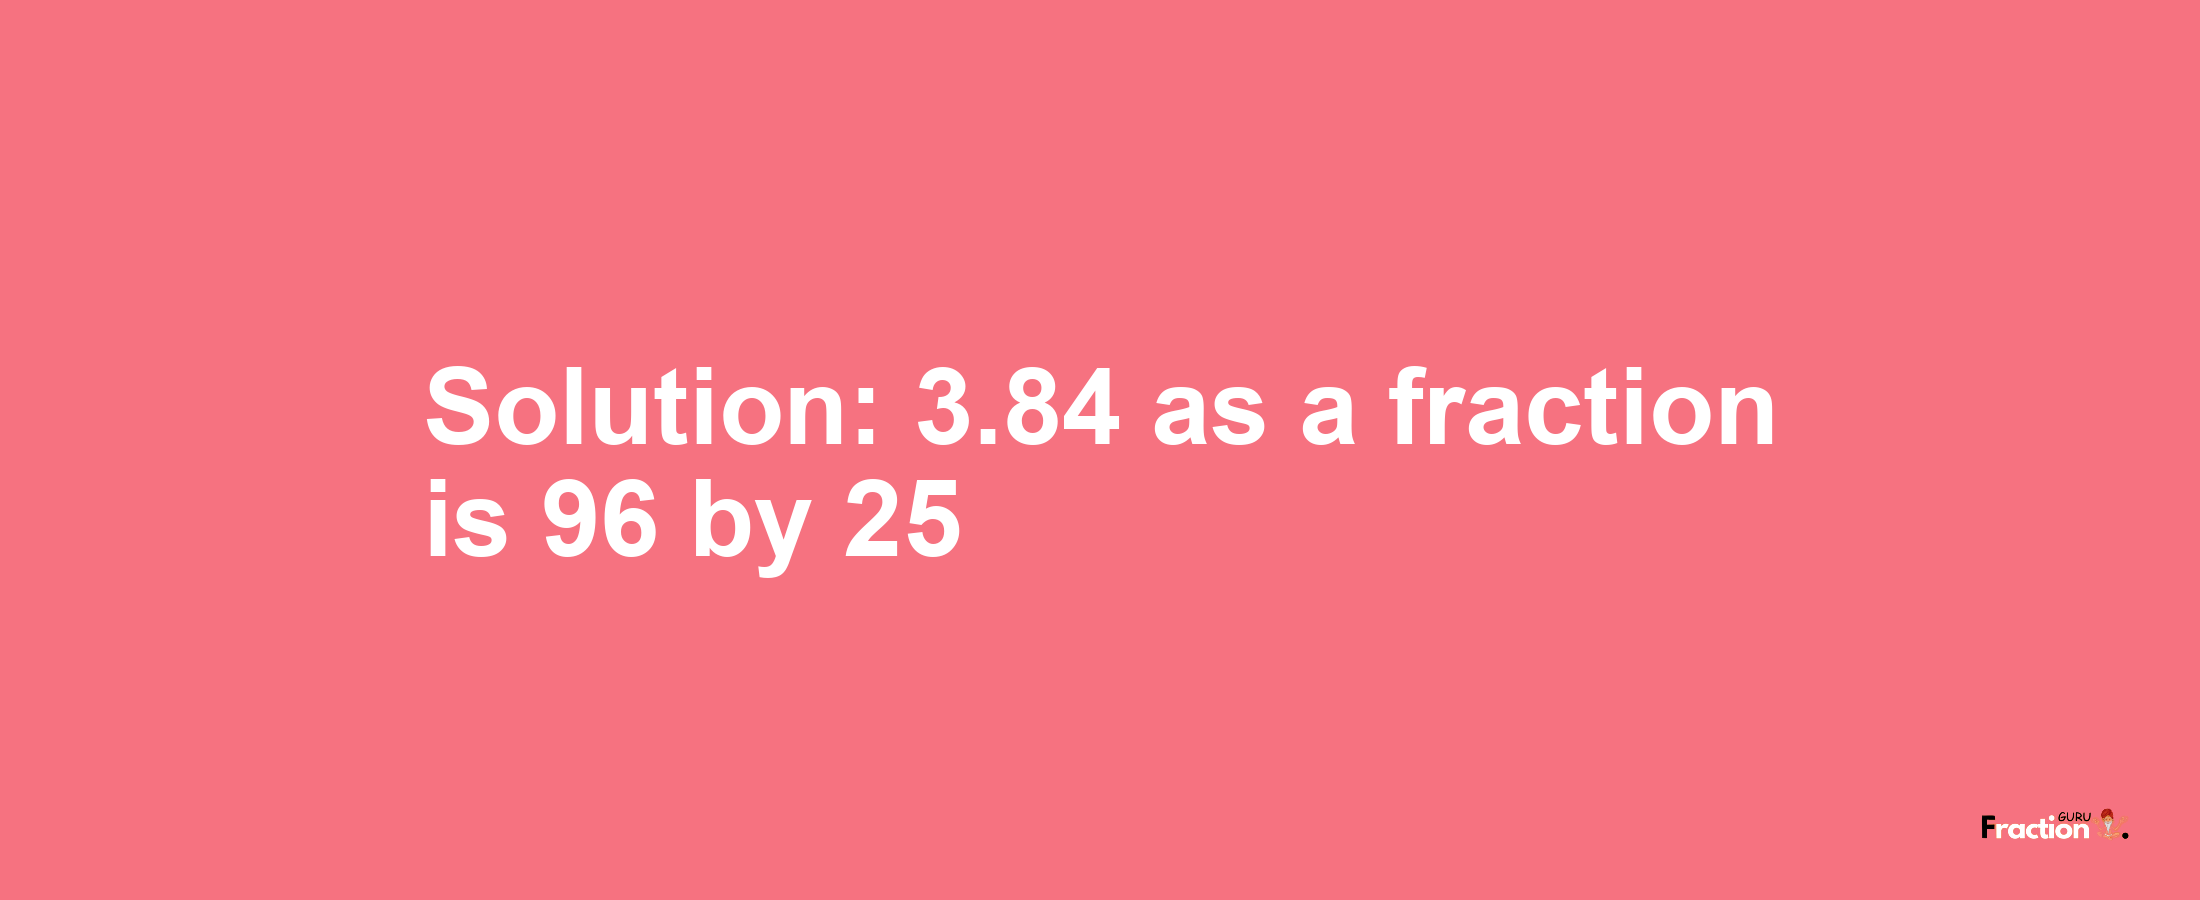 Solution:3.84 as a fraction is 96/25